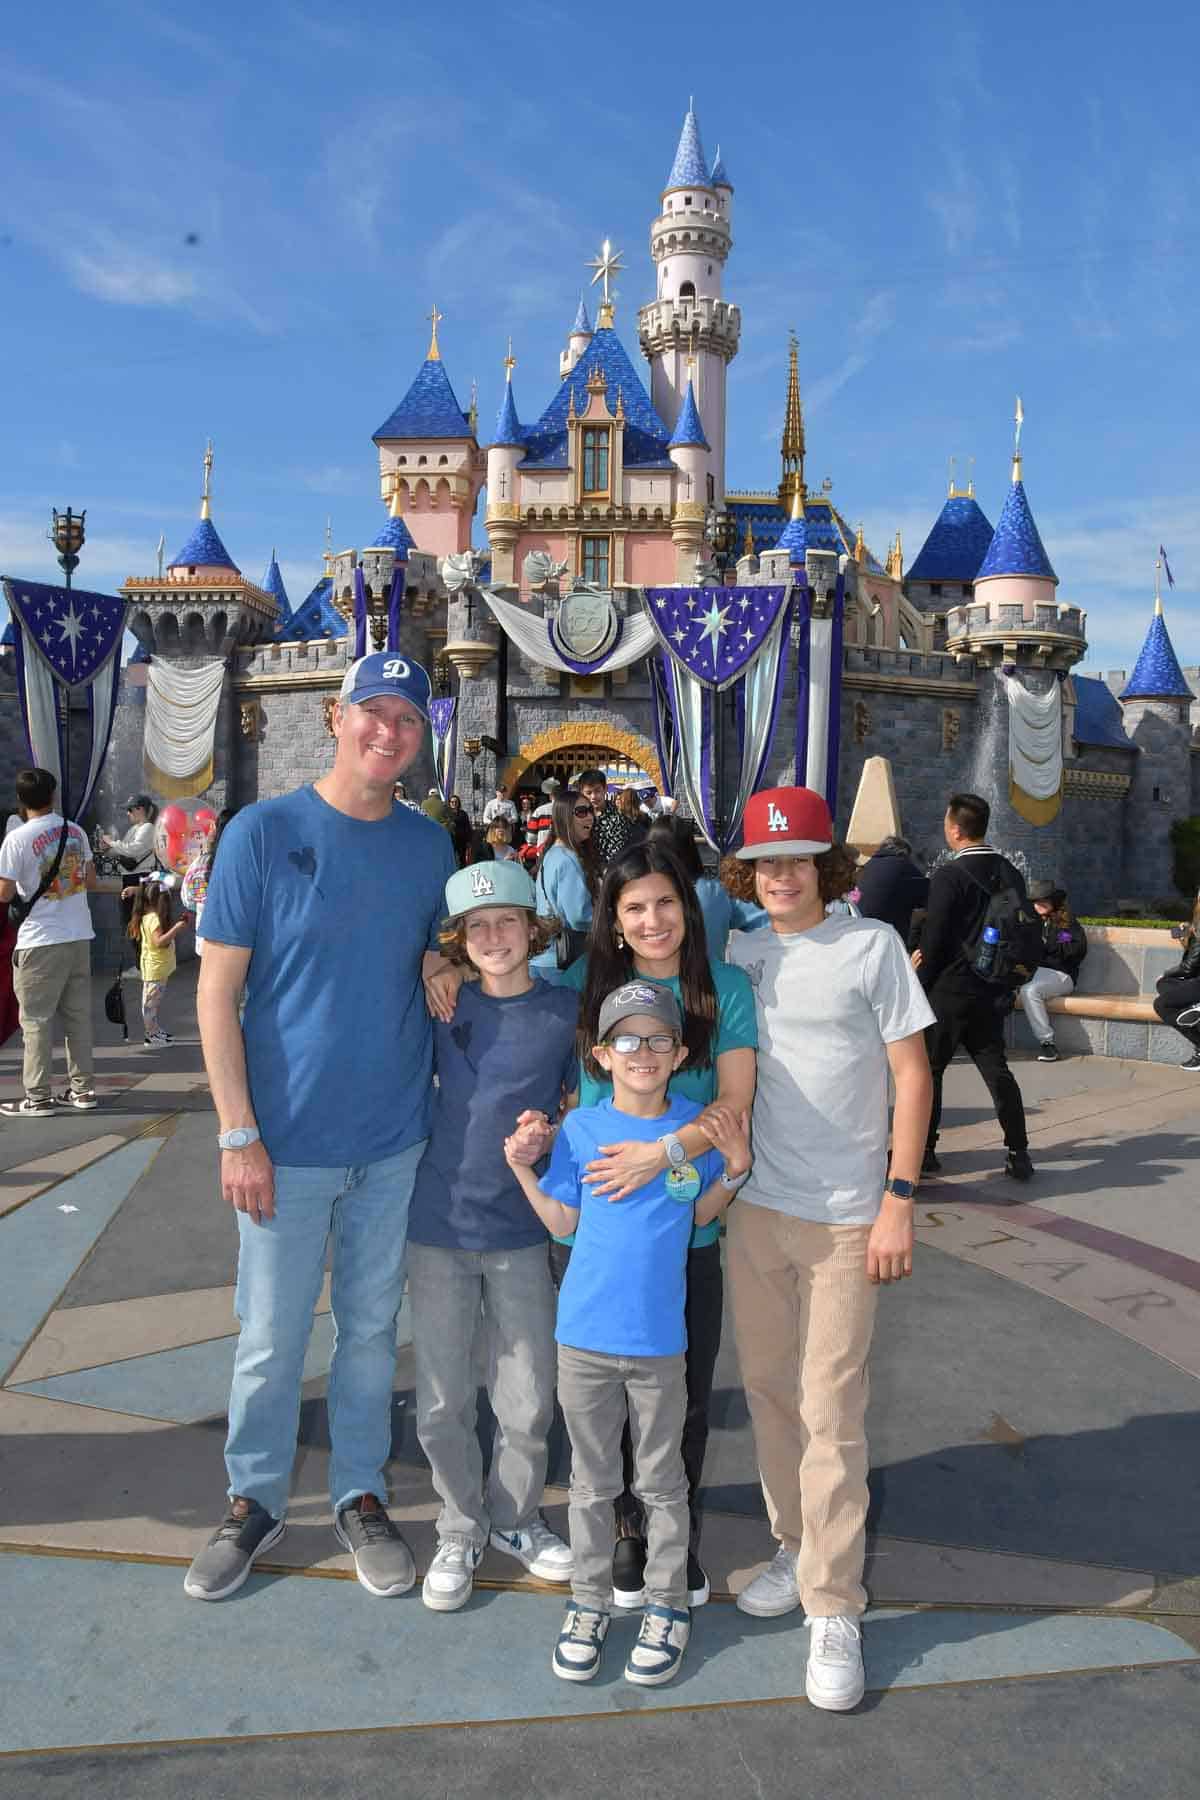 A family of five standing together with arms around each other in front of Cinderella's castle at Disneyland.